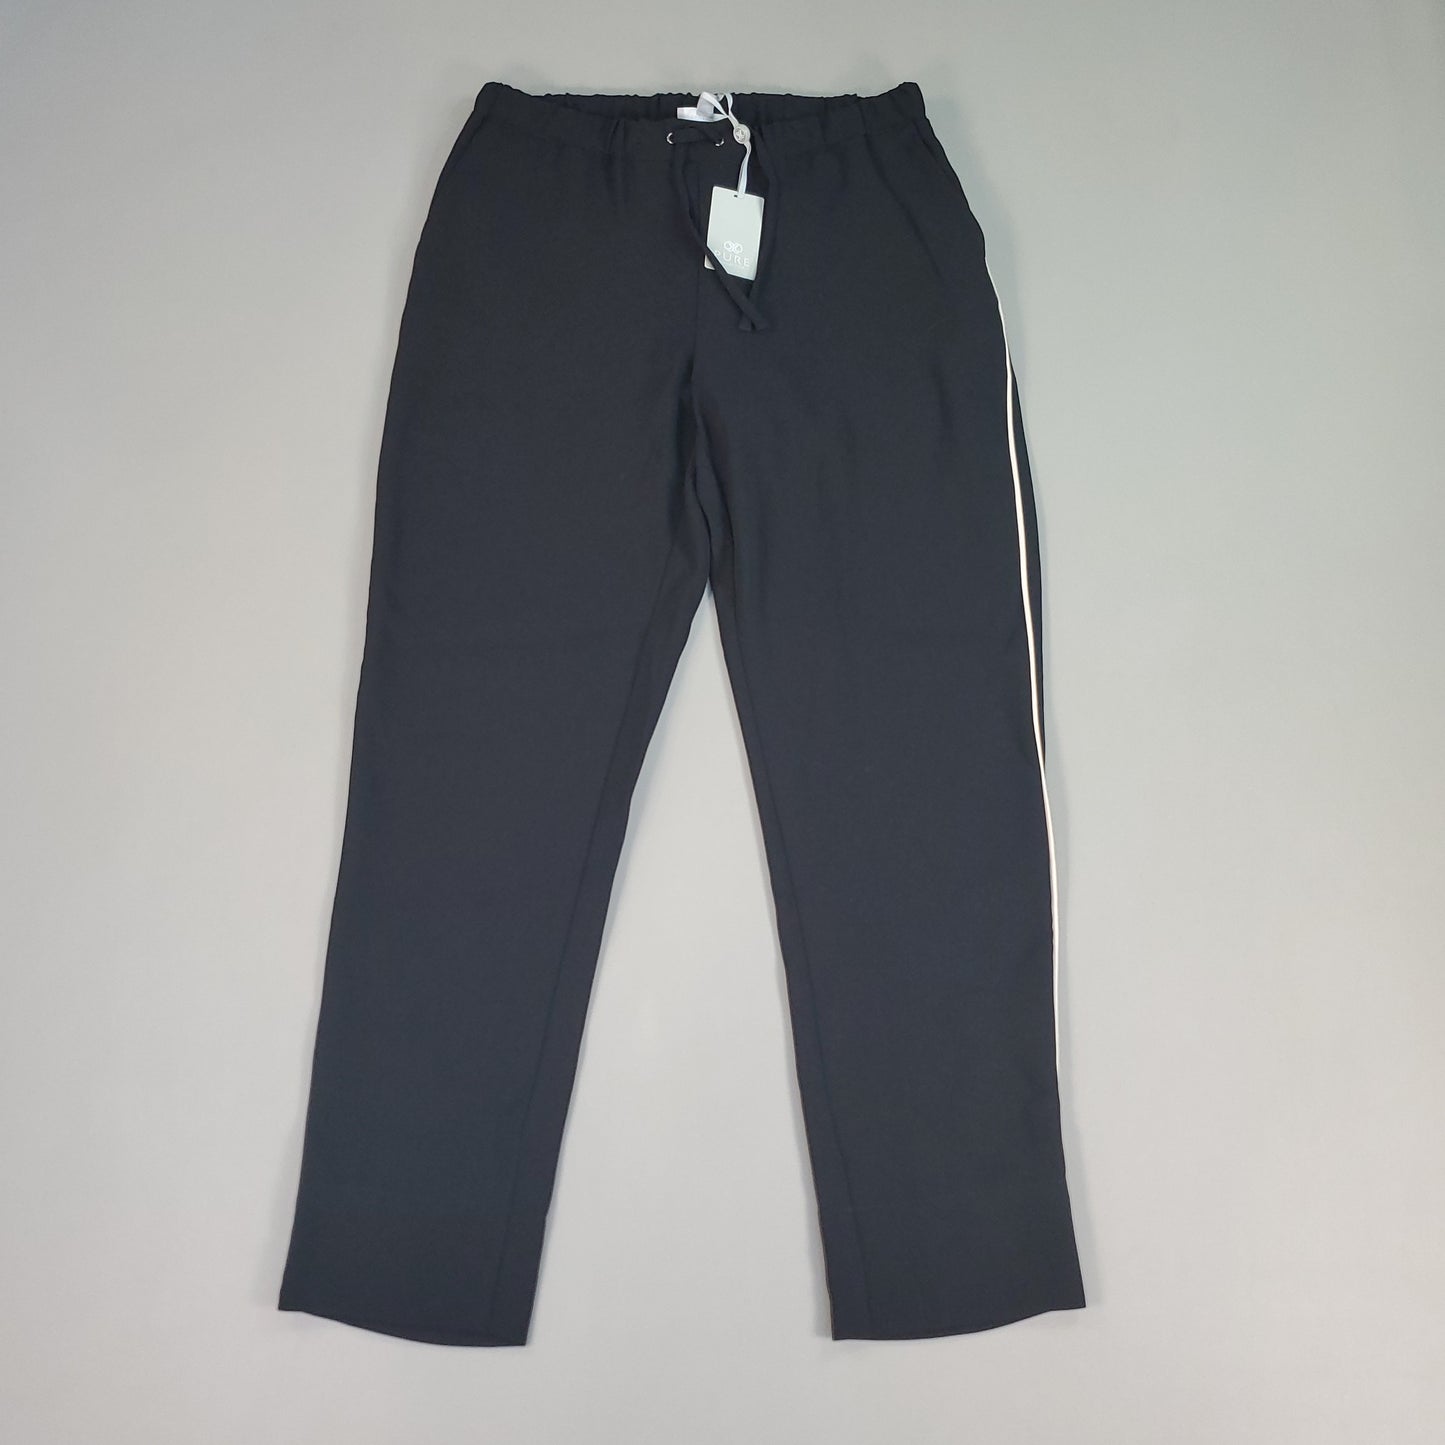 PURE COLLECTION Soft Trouser With Piping Detail Pants Women's Sz 6 Black (New)